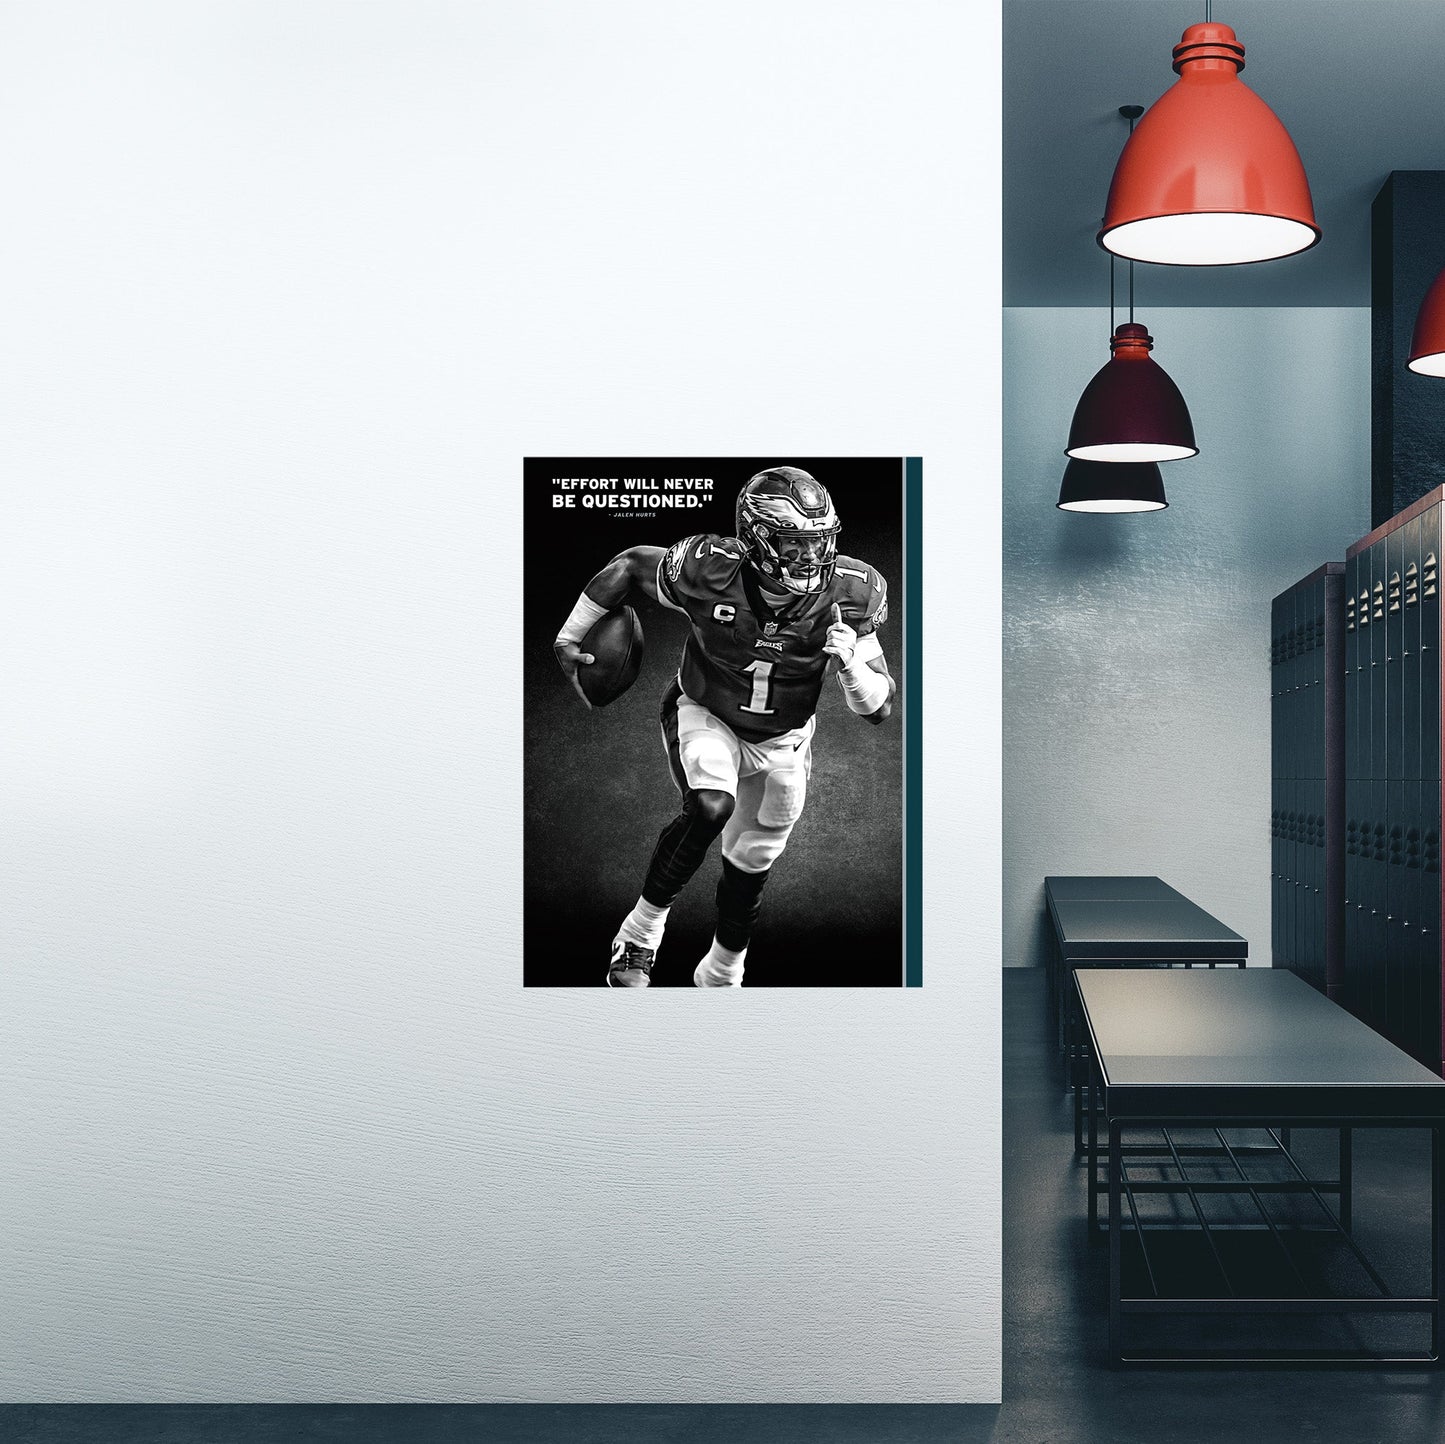 Philadelphia Eagles: Jalen Hurts Inspirational Poster - Officially Licensed NFL Removable Adhesive Decal